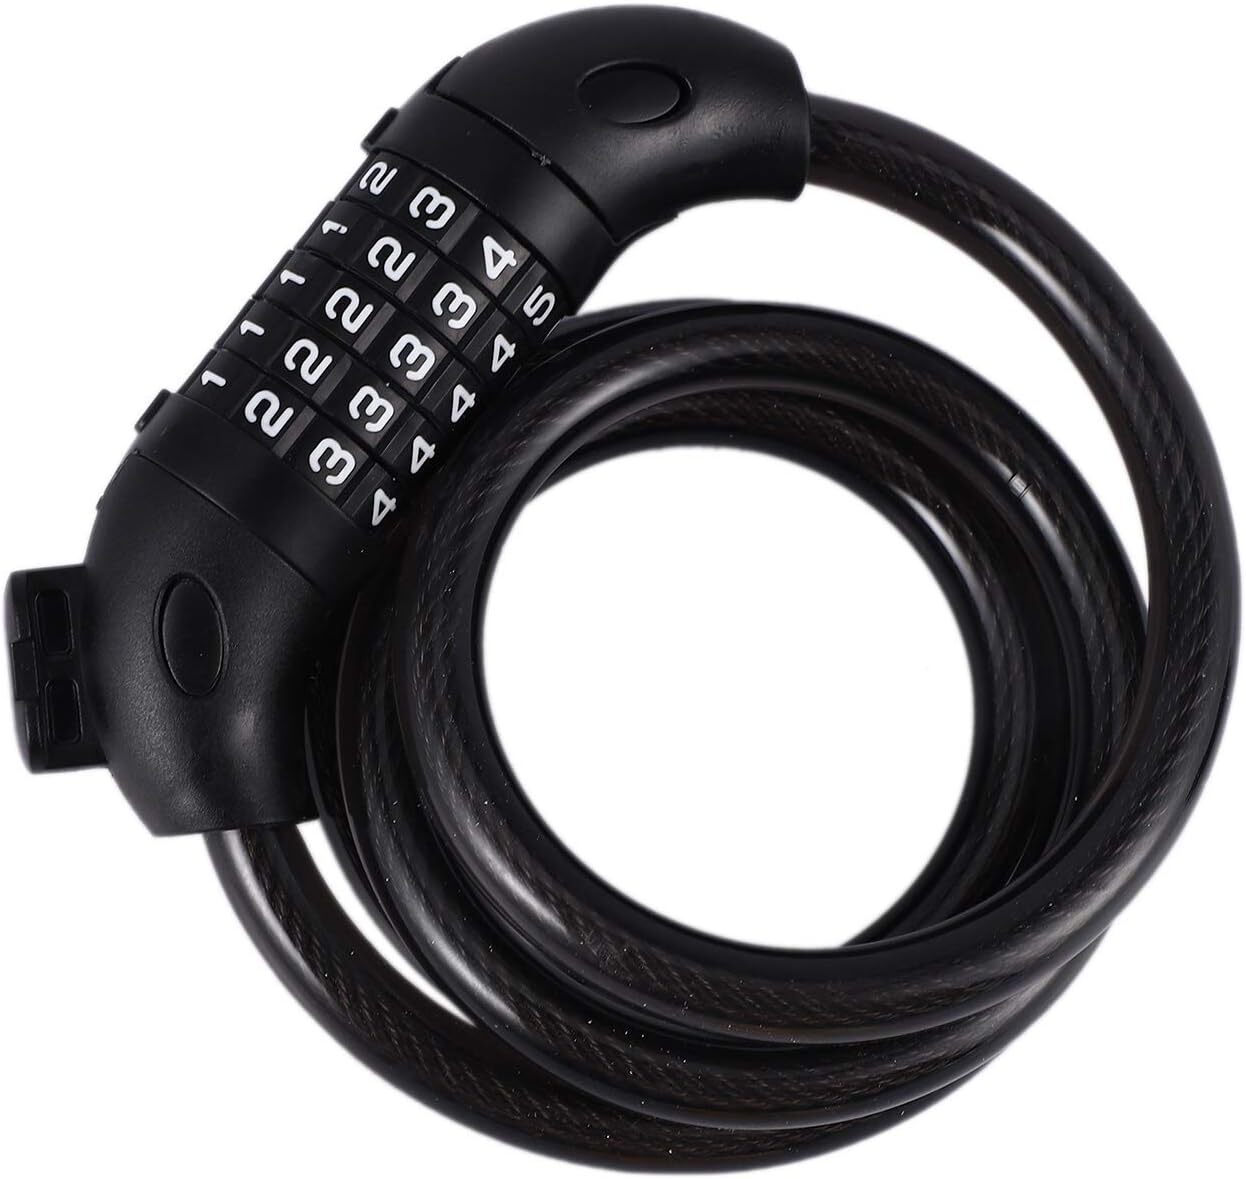 Heavy Duty 5-Digit Combination Anti-Theft Cable Bike Lock Bicycle Security